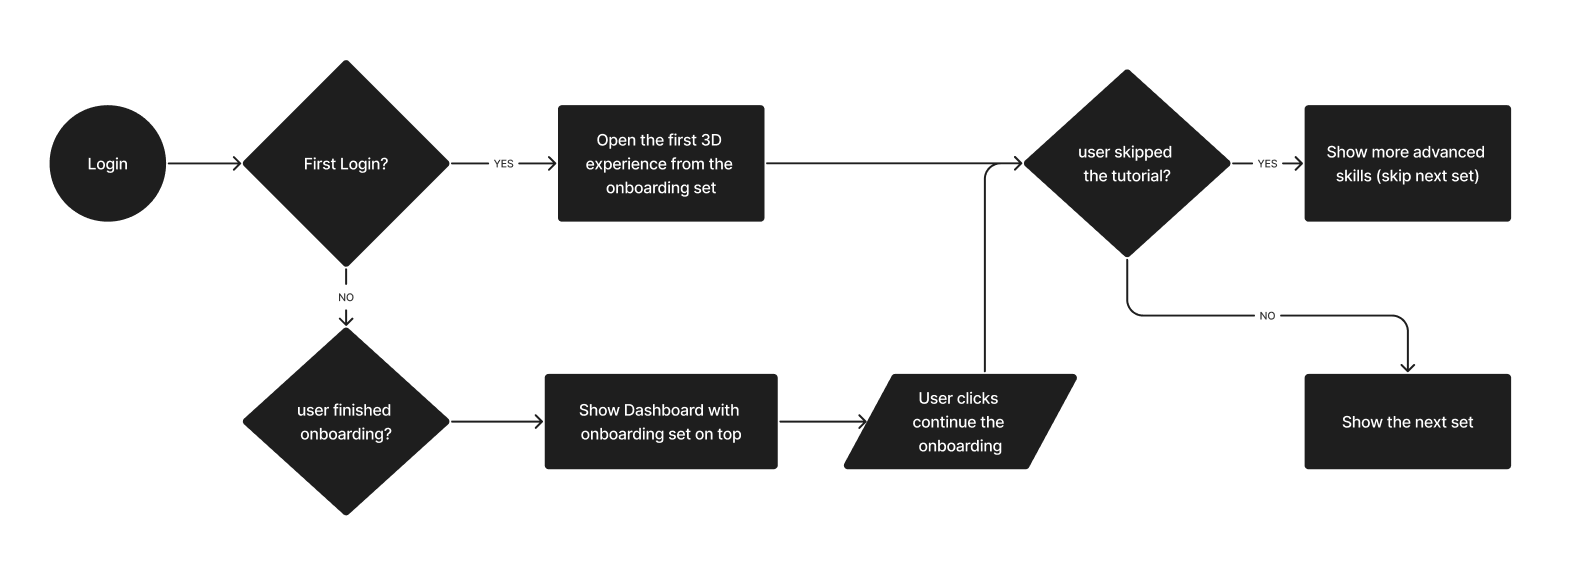 Diagram showing the user onboarding session after first login.